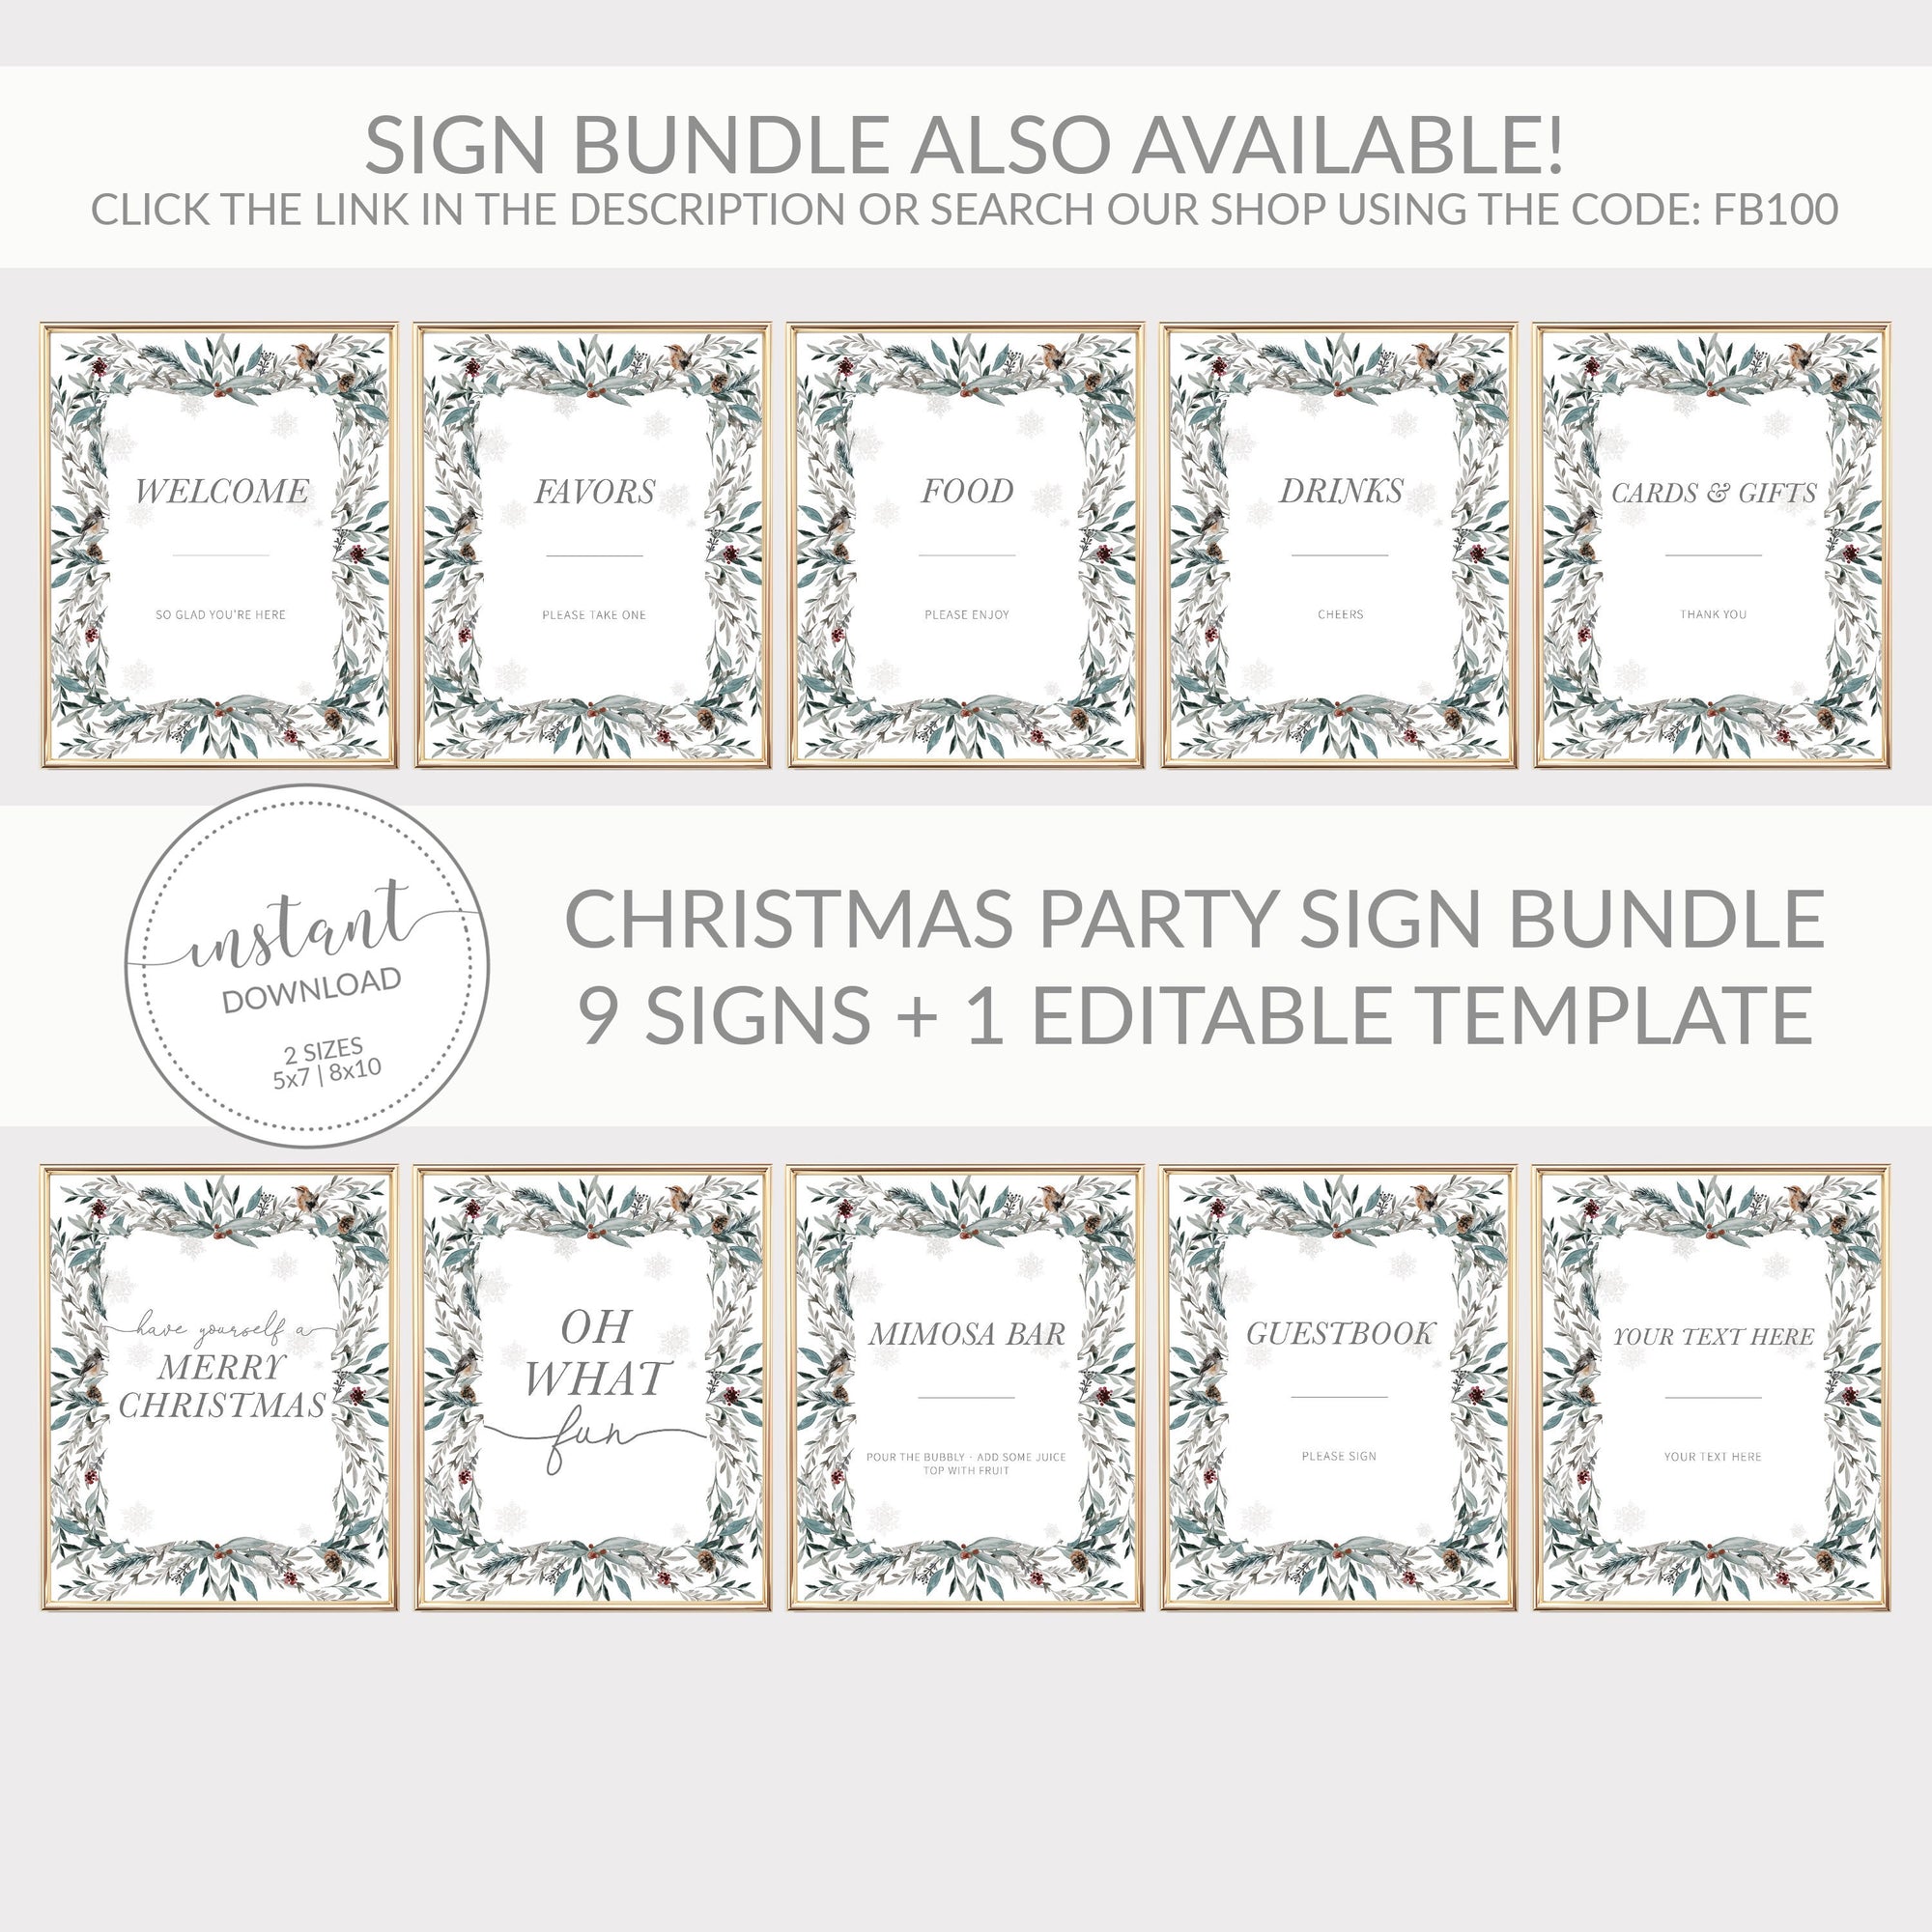 Christmas Party Food Sign Printable, Winter Bridal Shower, Baby Shower, Christmas Wedding, Holiday Party Decorations, INSTANT DOWNLOAD FB100